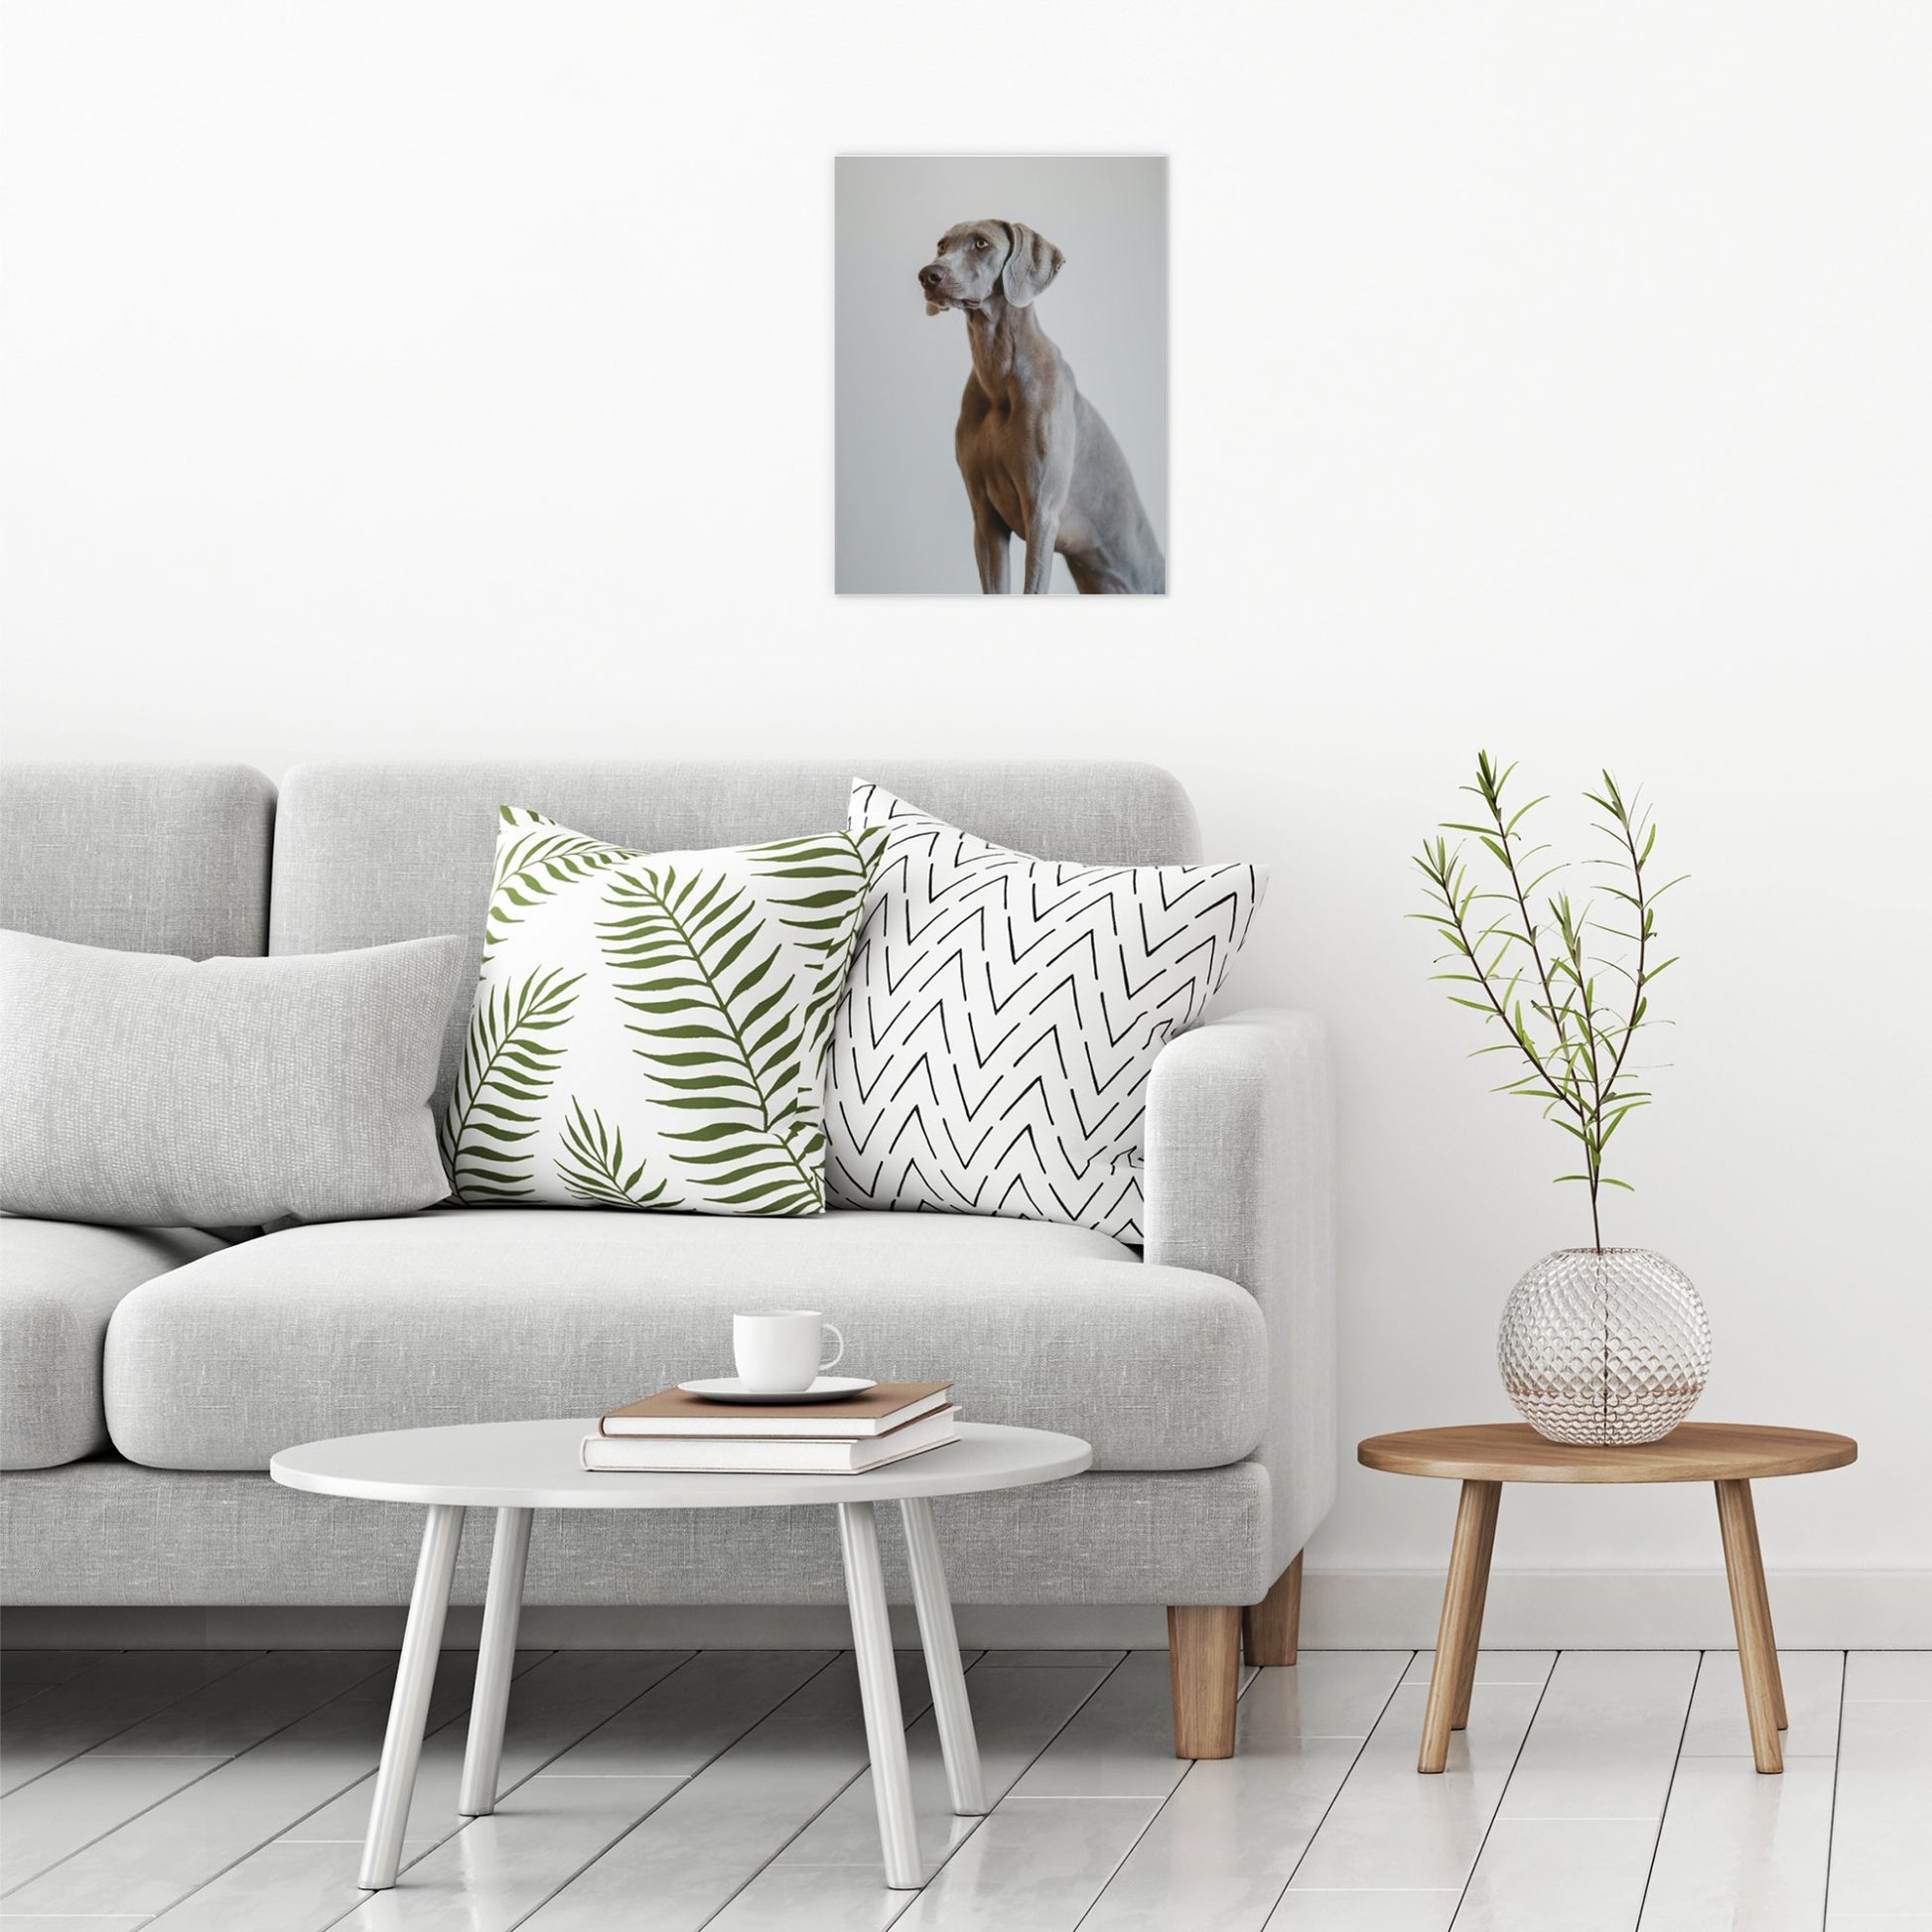 A contemporary modern room view showing a medium size metal art poster display plate with printed design of a Weimaraner